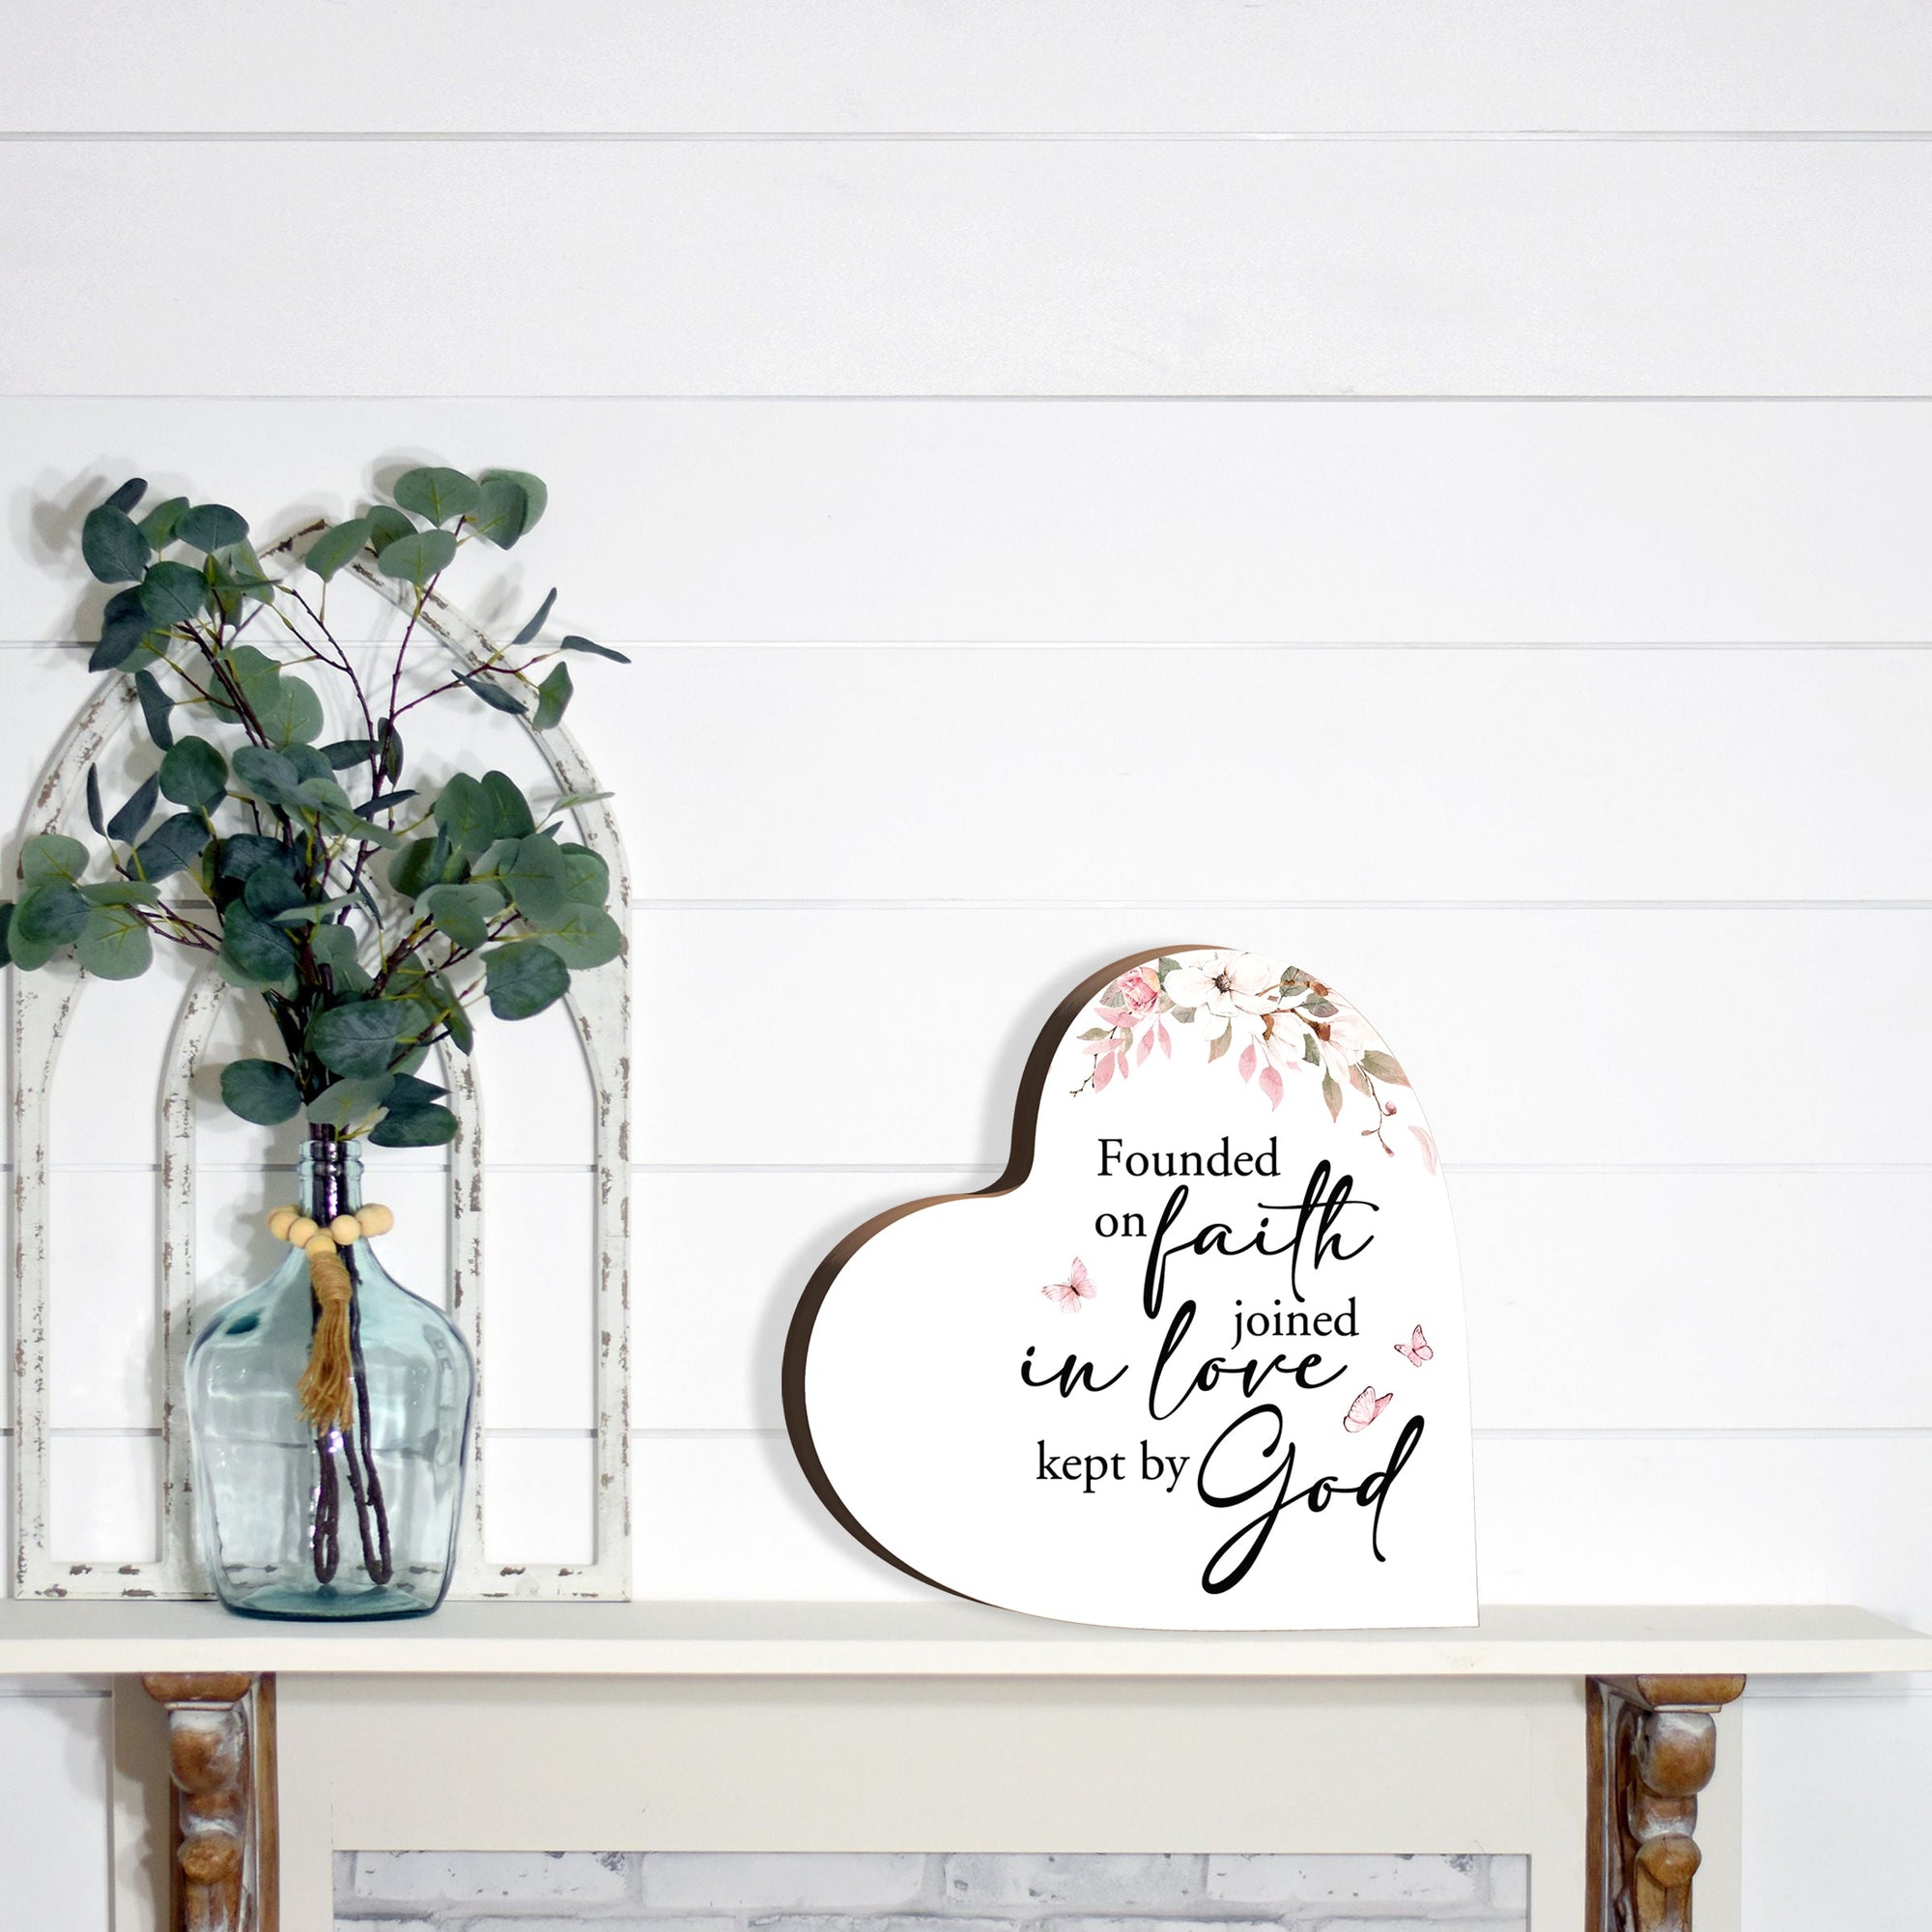 Lifesong Milestones wooden heart block sign - A meaningful home decoration